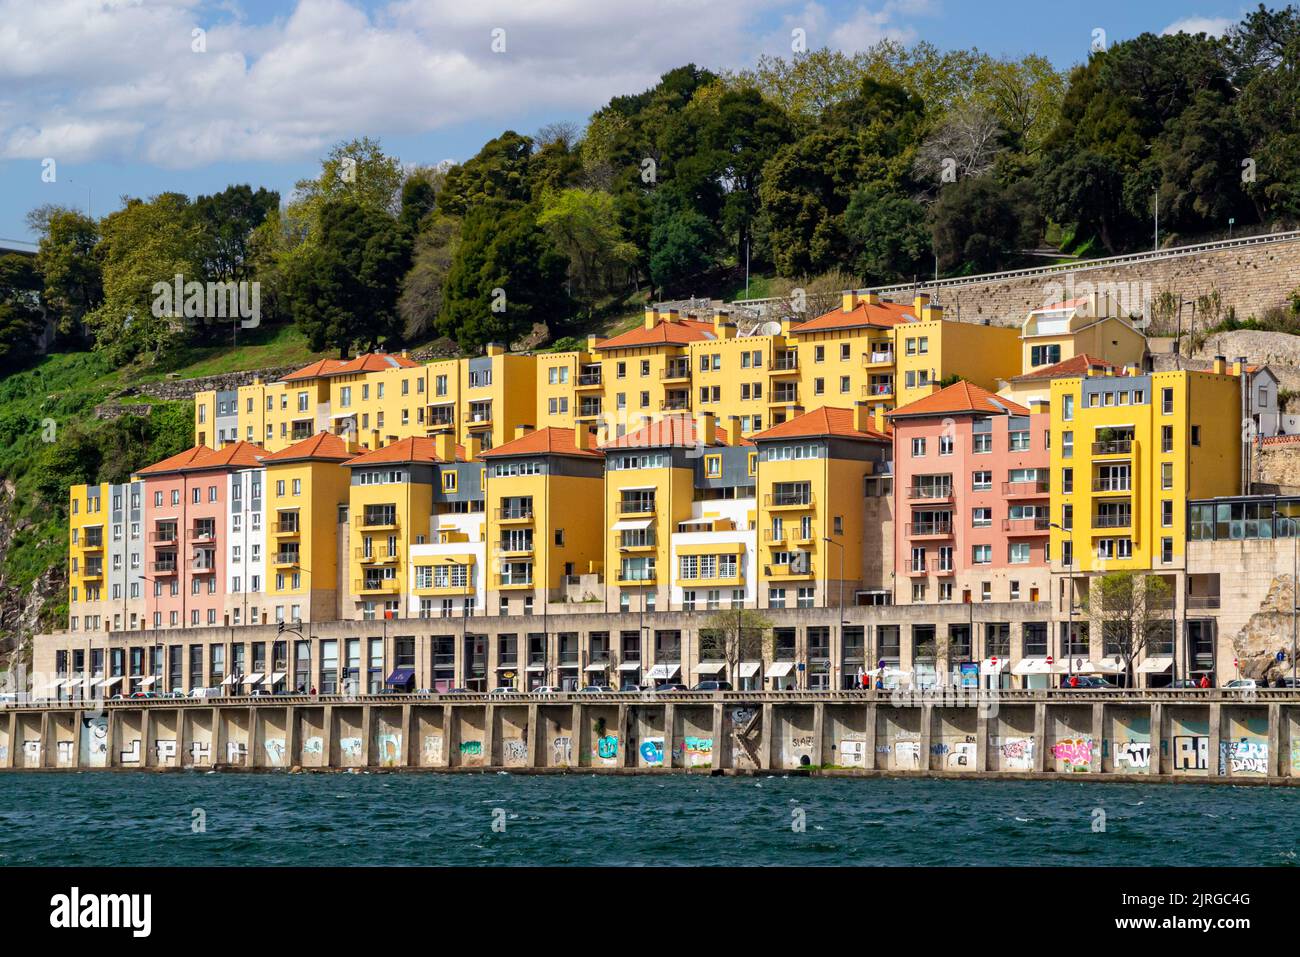 Modern flats on the banks of the River Douro in Porto a major city in northern Portugal. Stock Photo